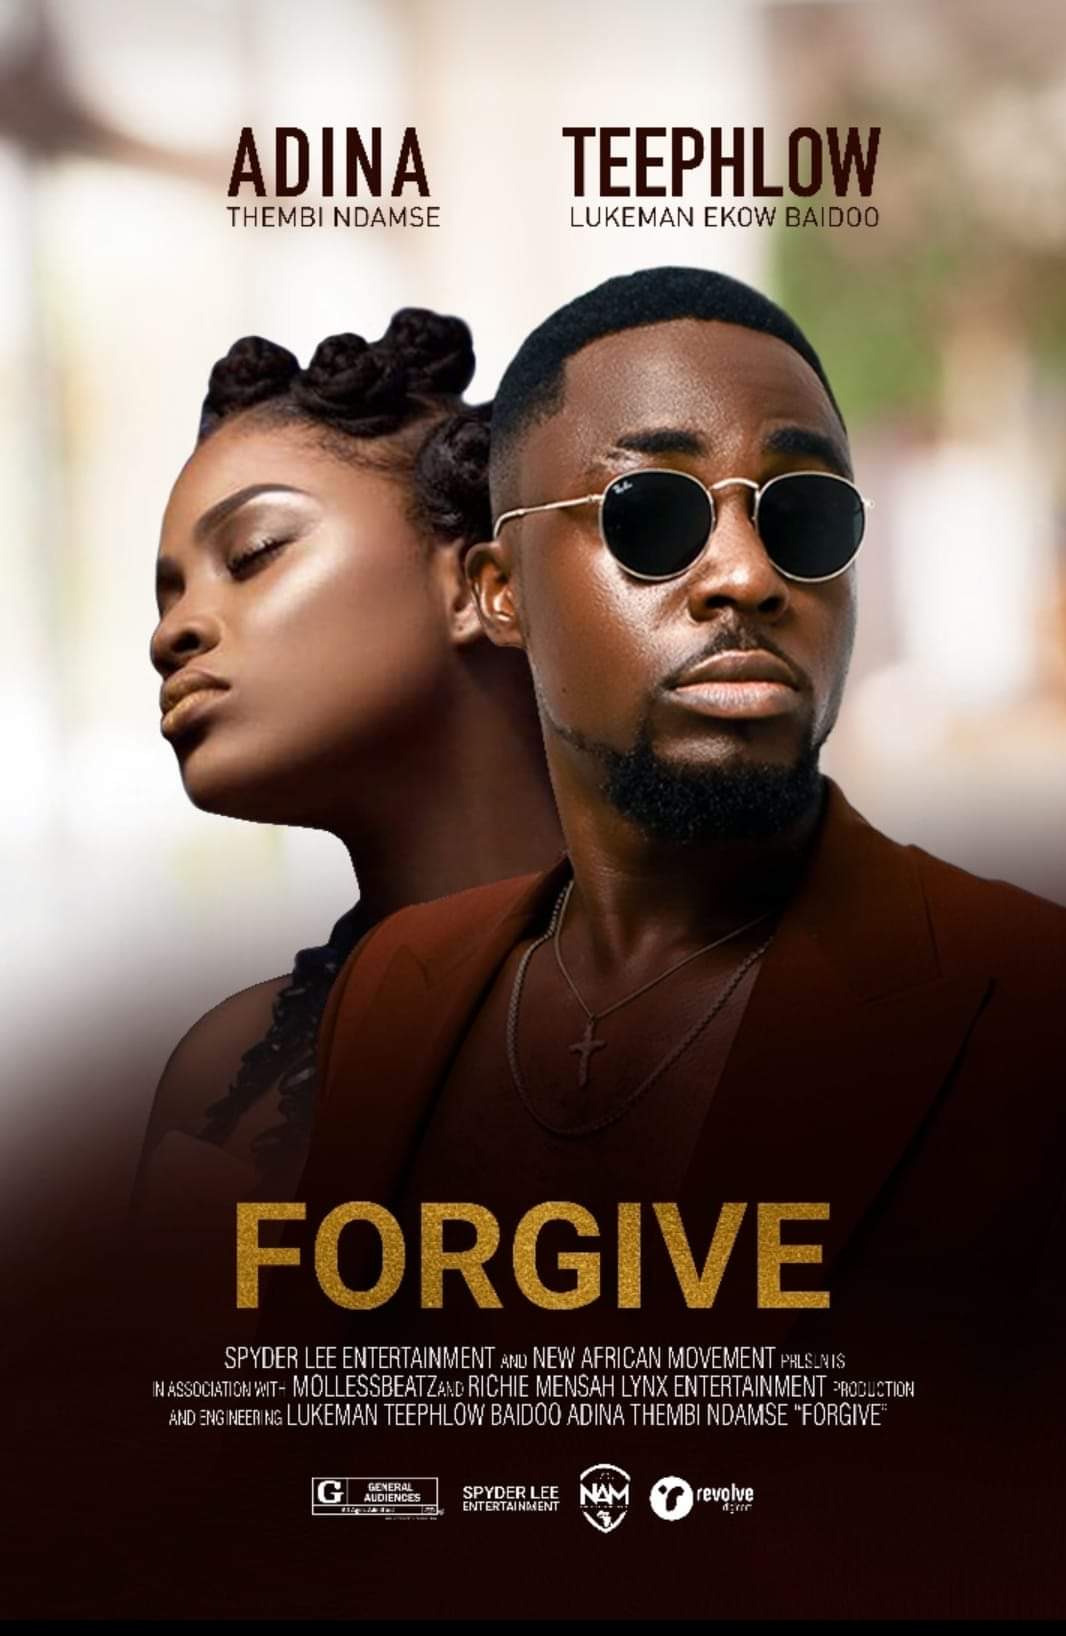 VIDEO: TeePhlow ft. Adina – Forgive (Directed By KP Selorm)